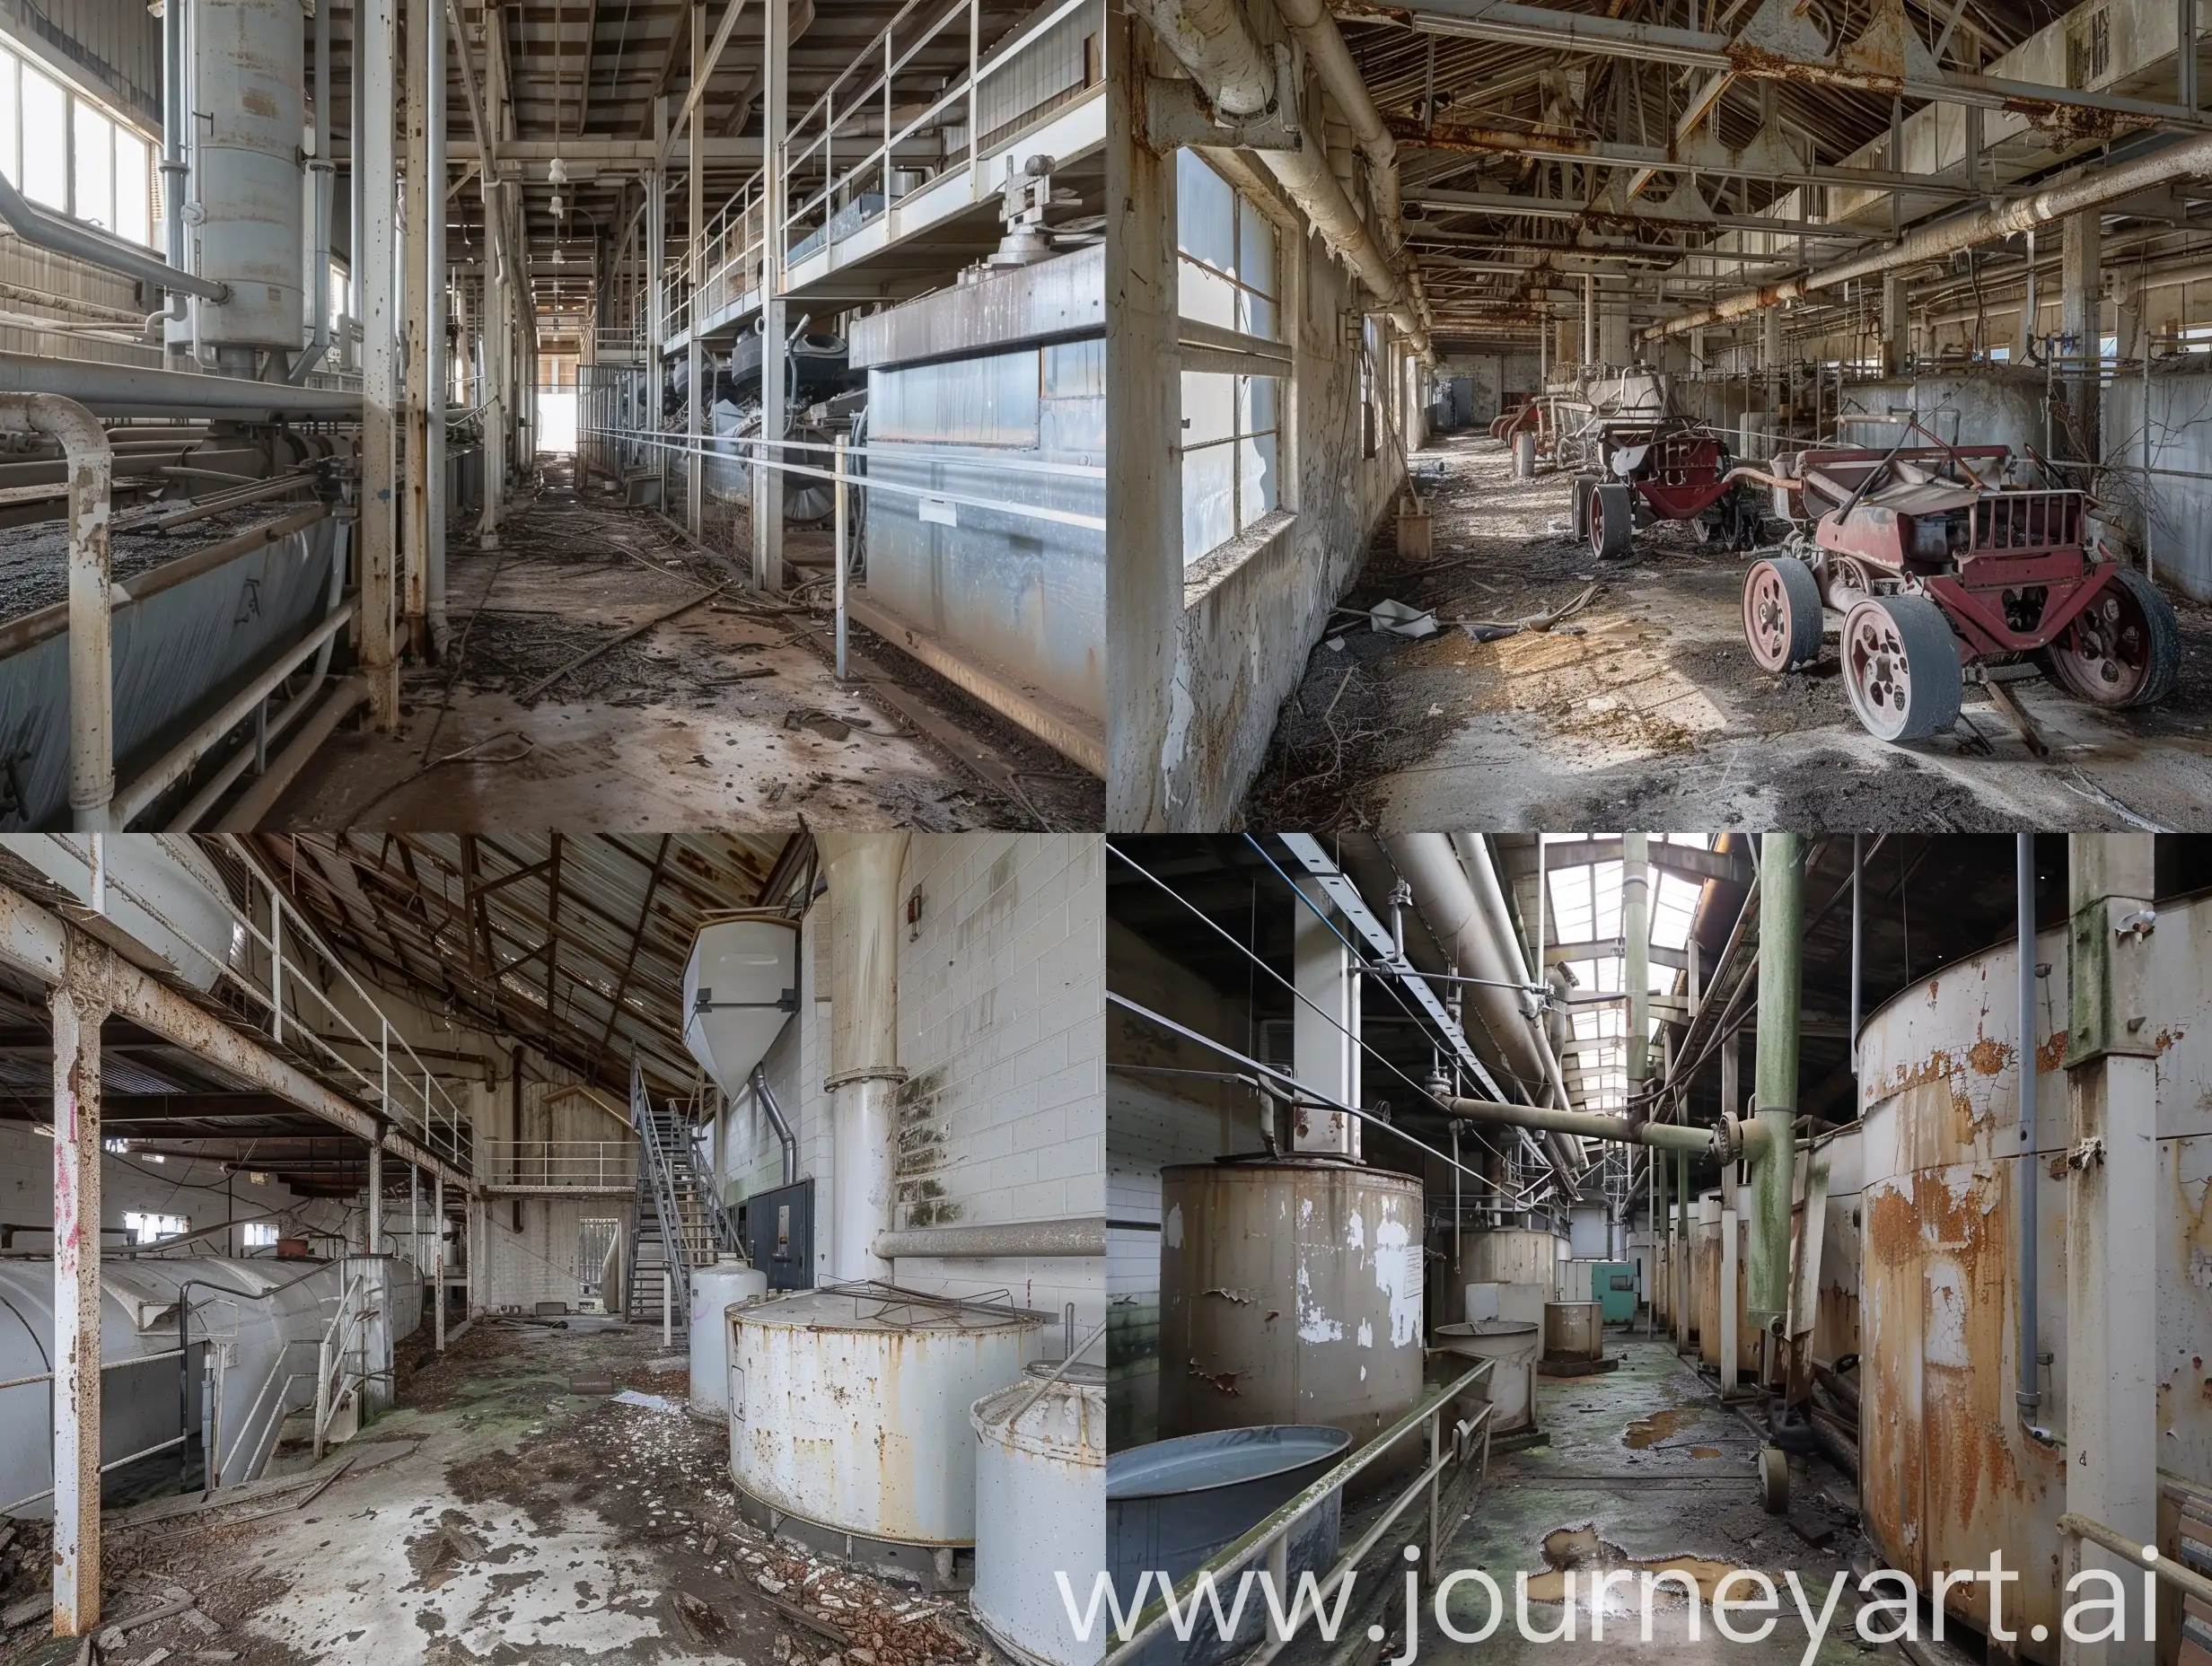 Eerie-Abandoned-Dairy-Factory-with-Rusty-Equipment